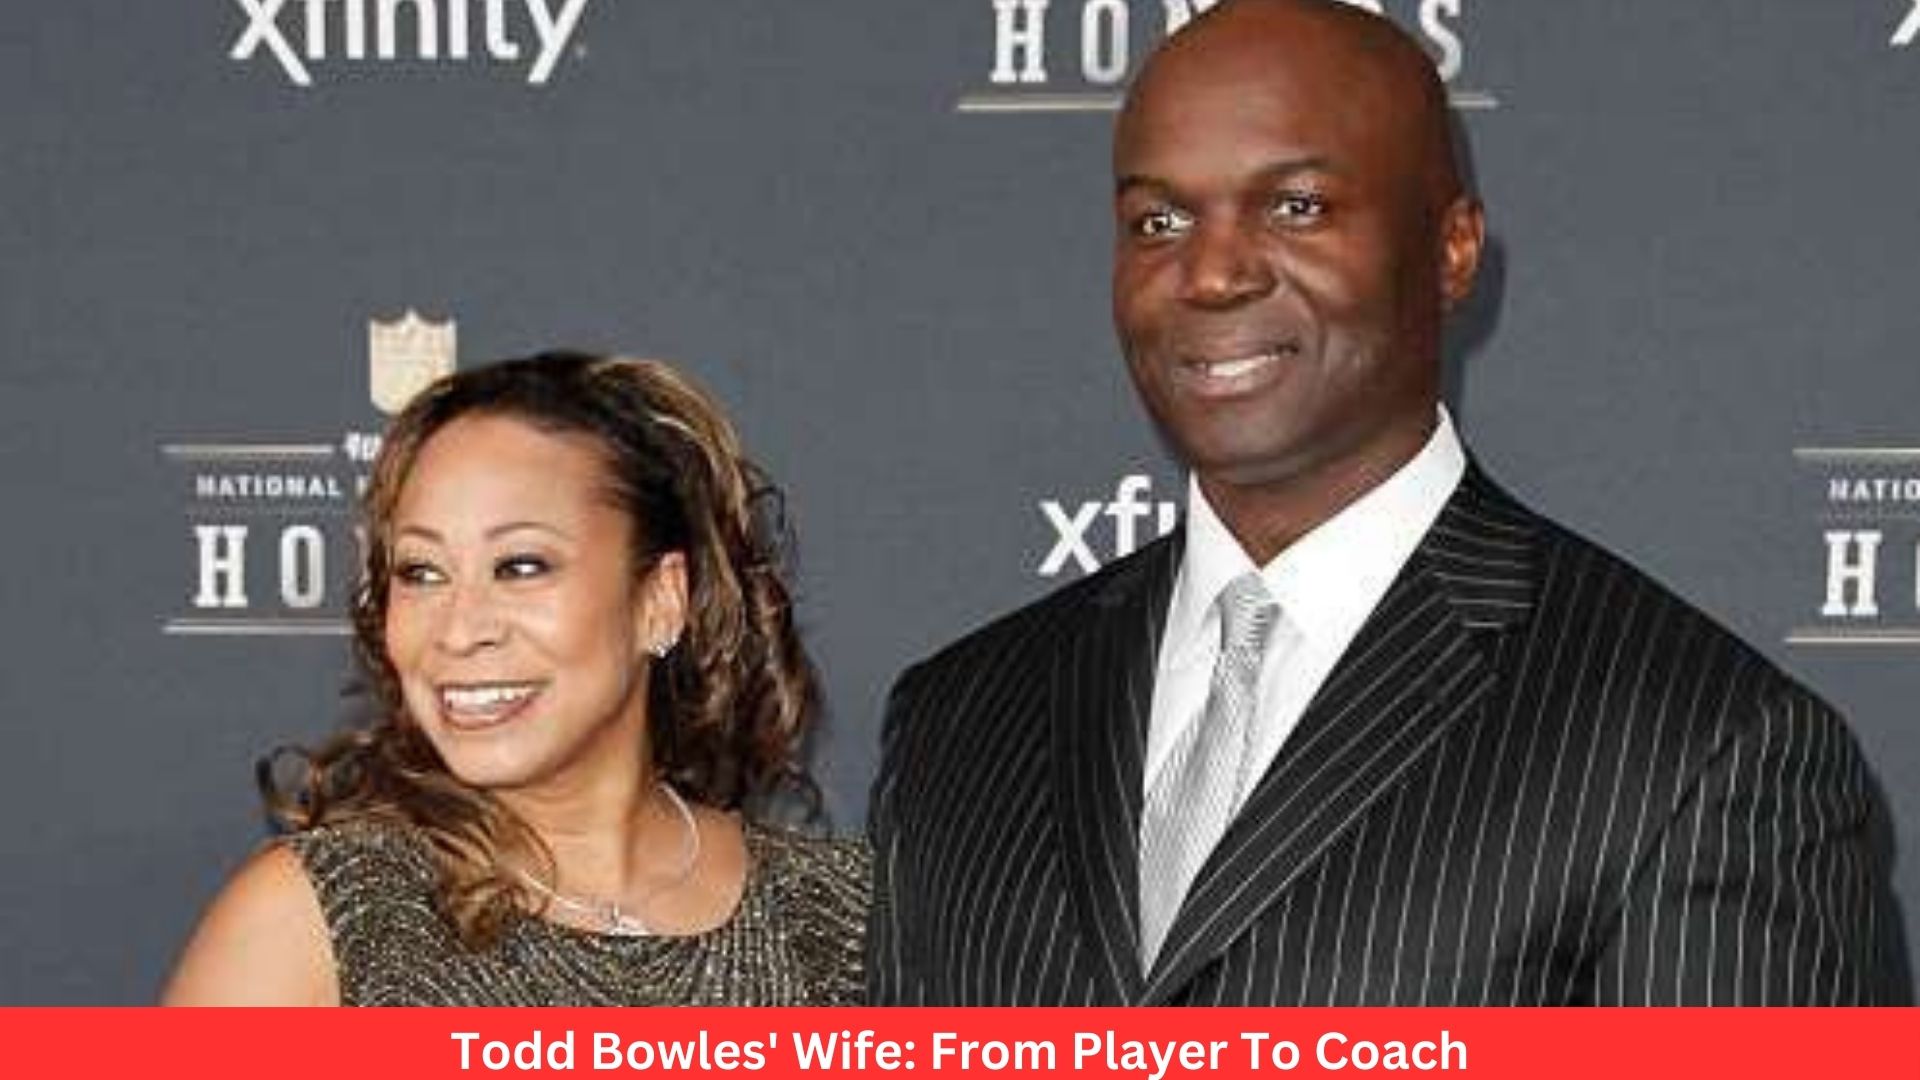 Todd Bowles' Wife: From Player To Coach